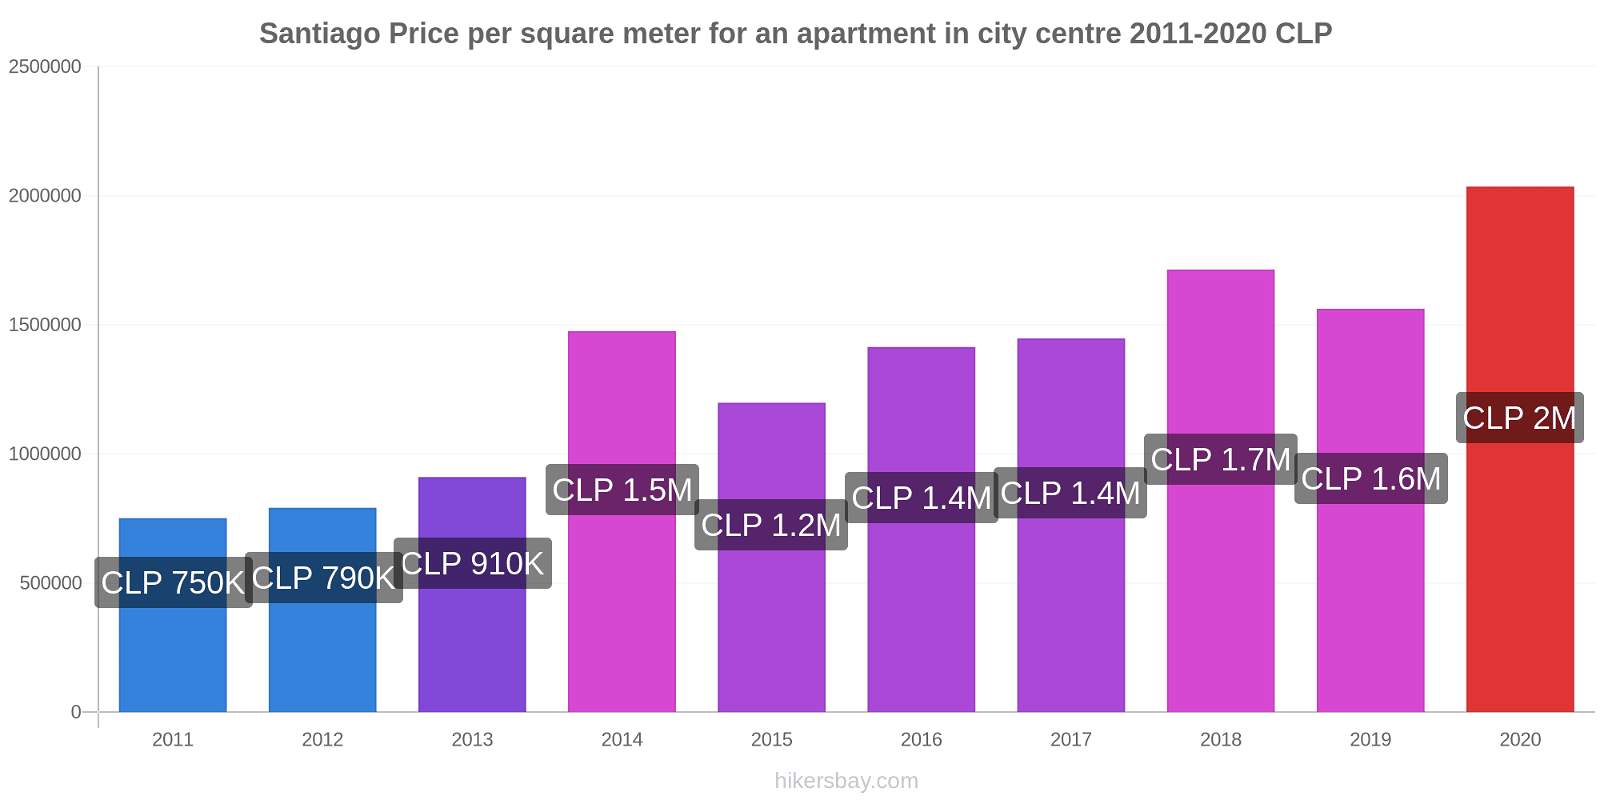 Santiago price changes Price per square meter for an apartment in city centre hikersbay.com